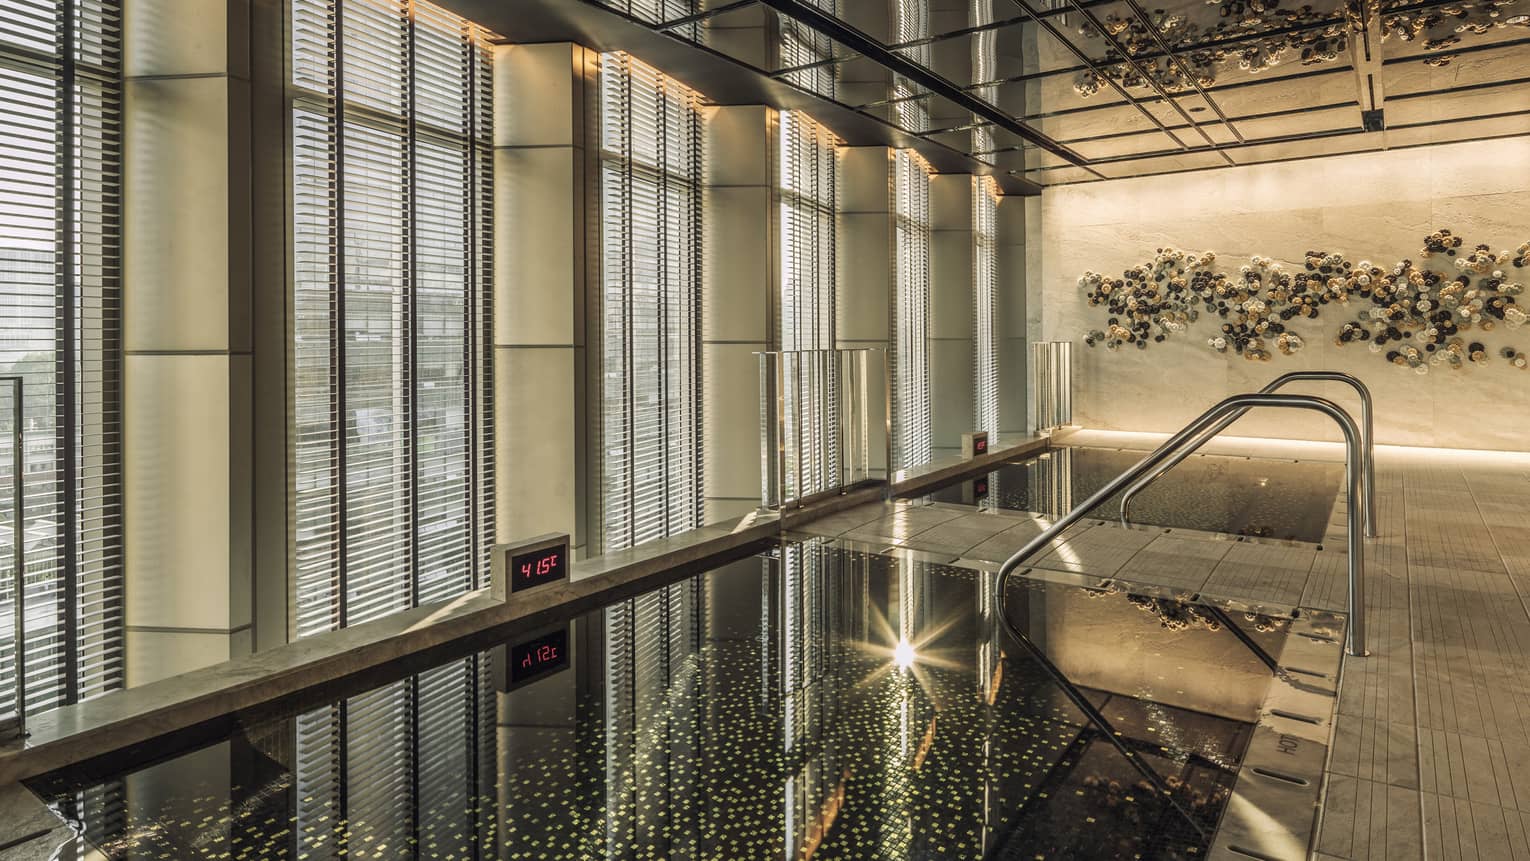 Korean Sauna windows with blinds over two mosaic tile pools reflecting sparkling lights